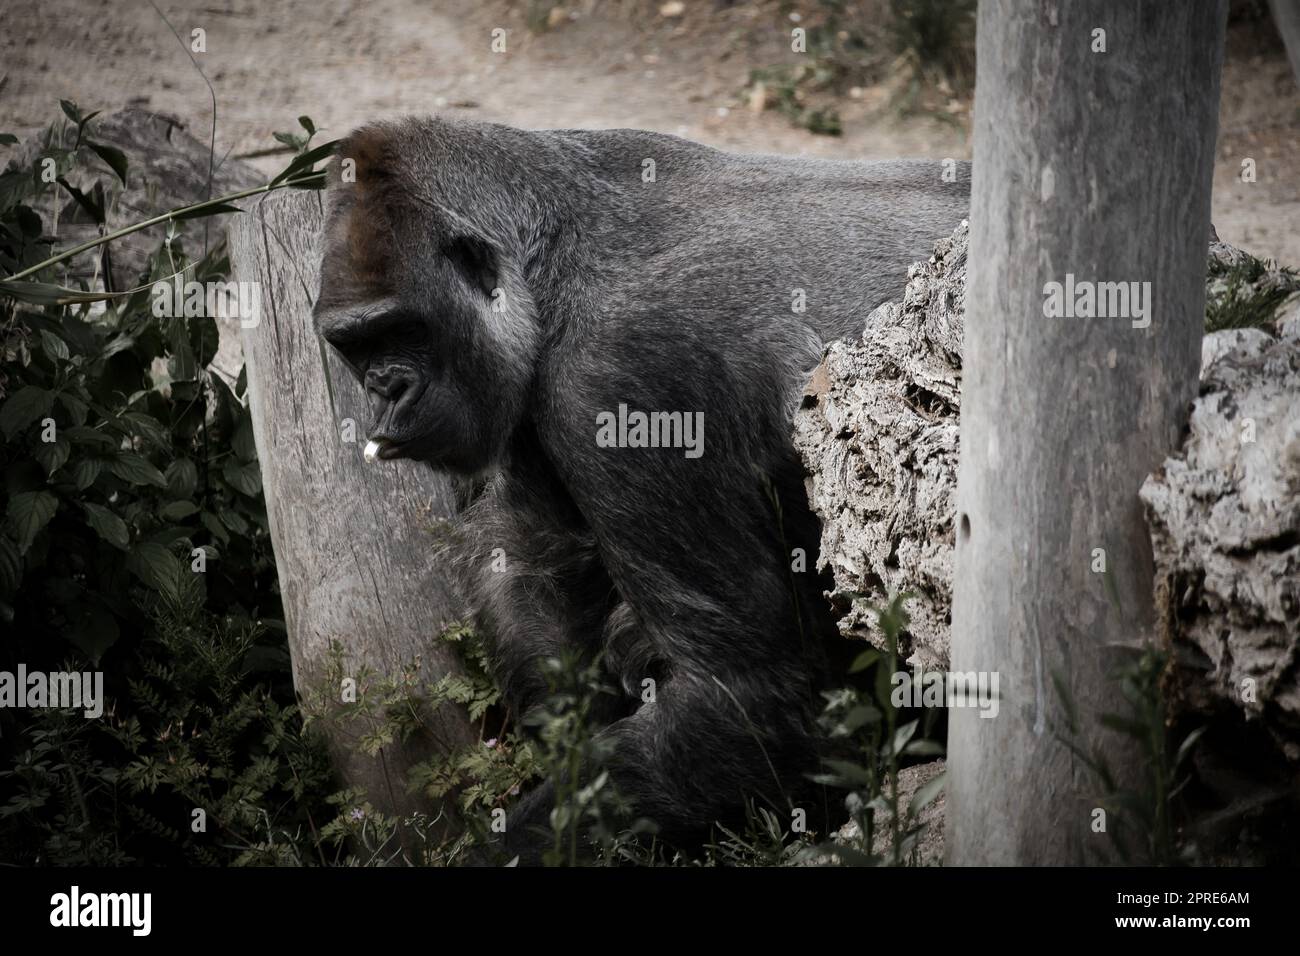 Gorilla, Silver back. The herbivorous big ape is impressive and strong. Stock Photo